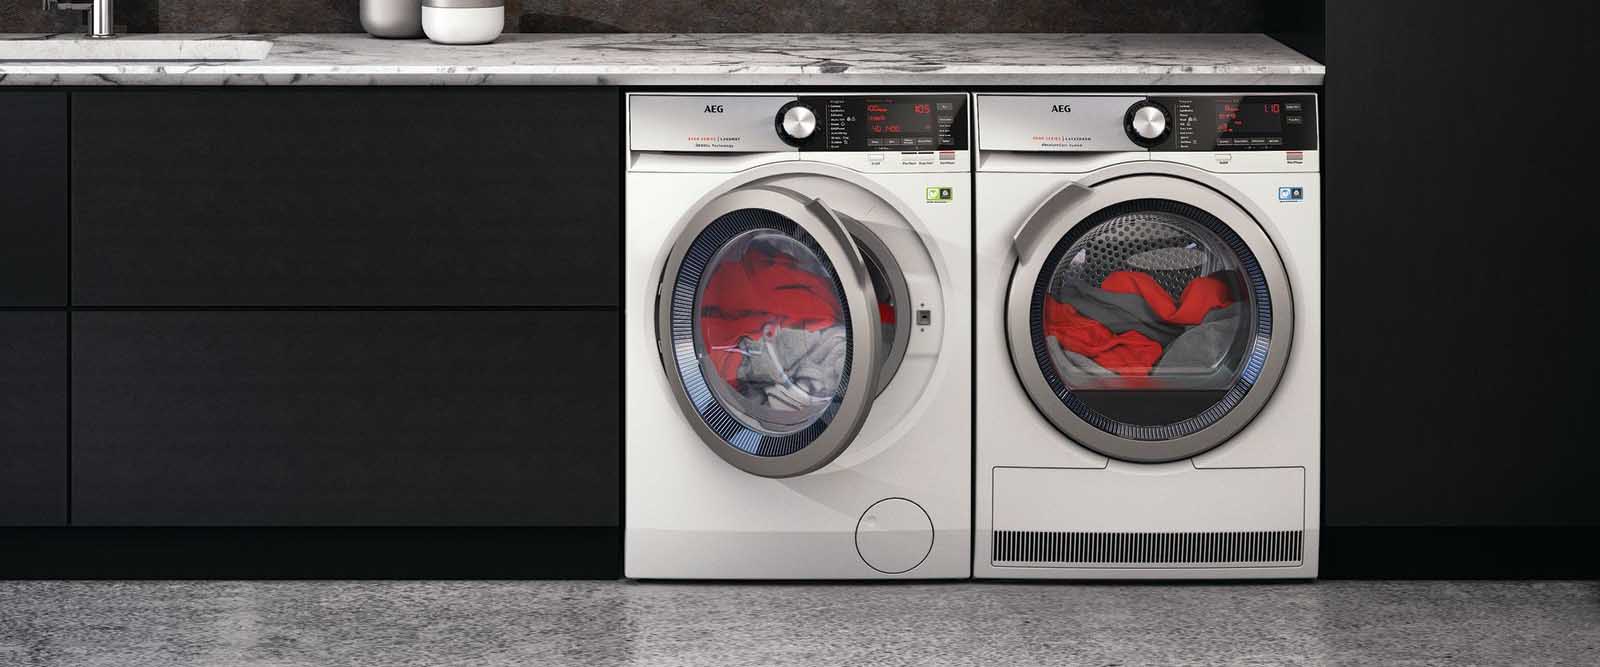 Save Up To $300 On Selected AEG Washing Machines & Dryers* at Hart & Co